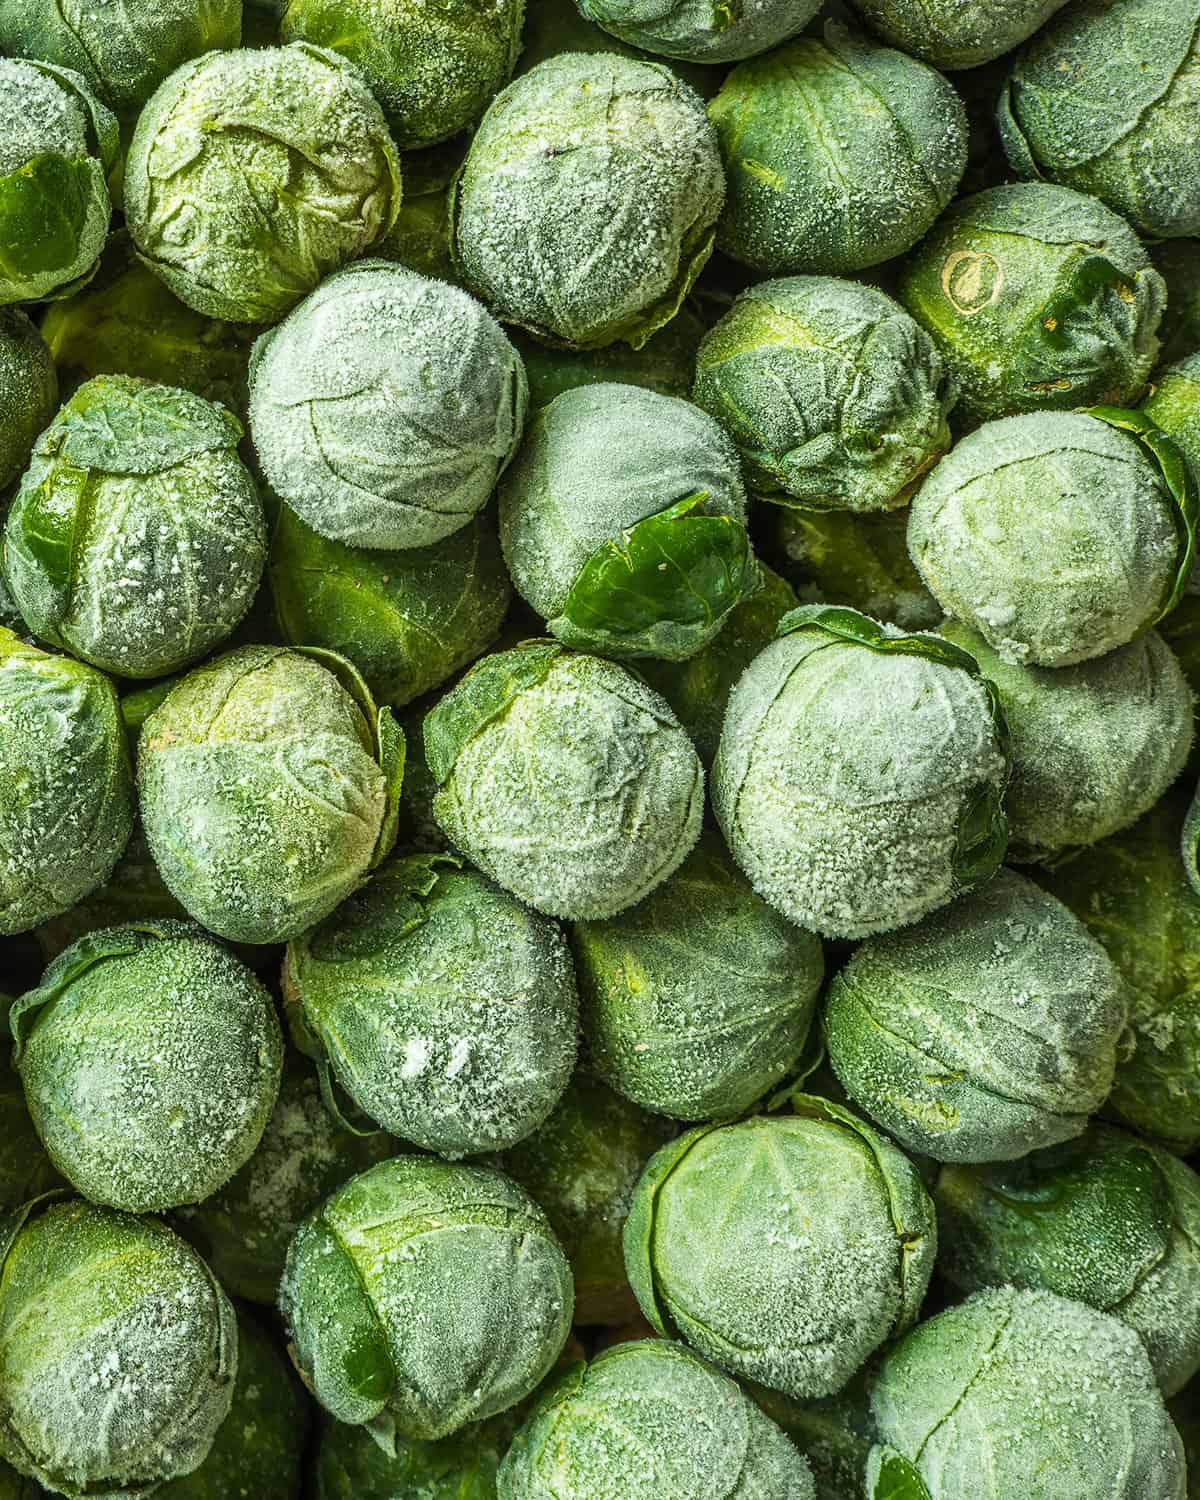 A photo of Brussels Sprouts, a vegetable that is in season in February.